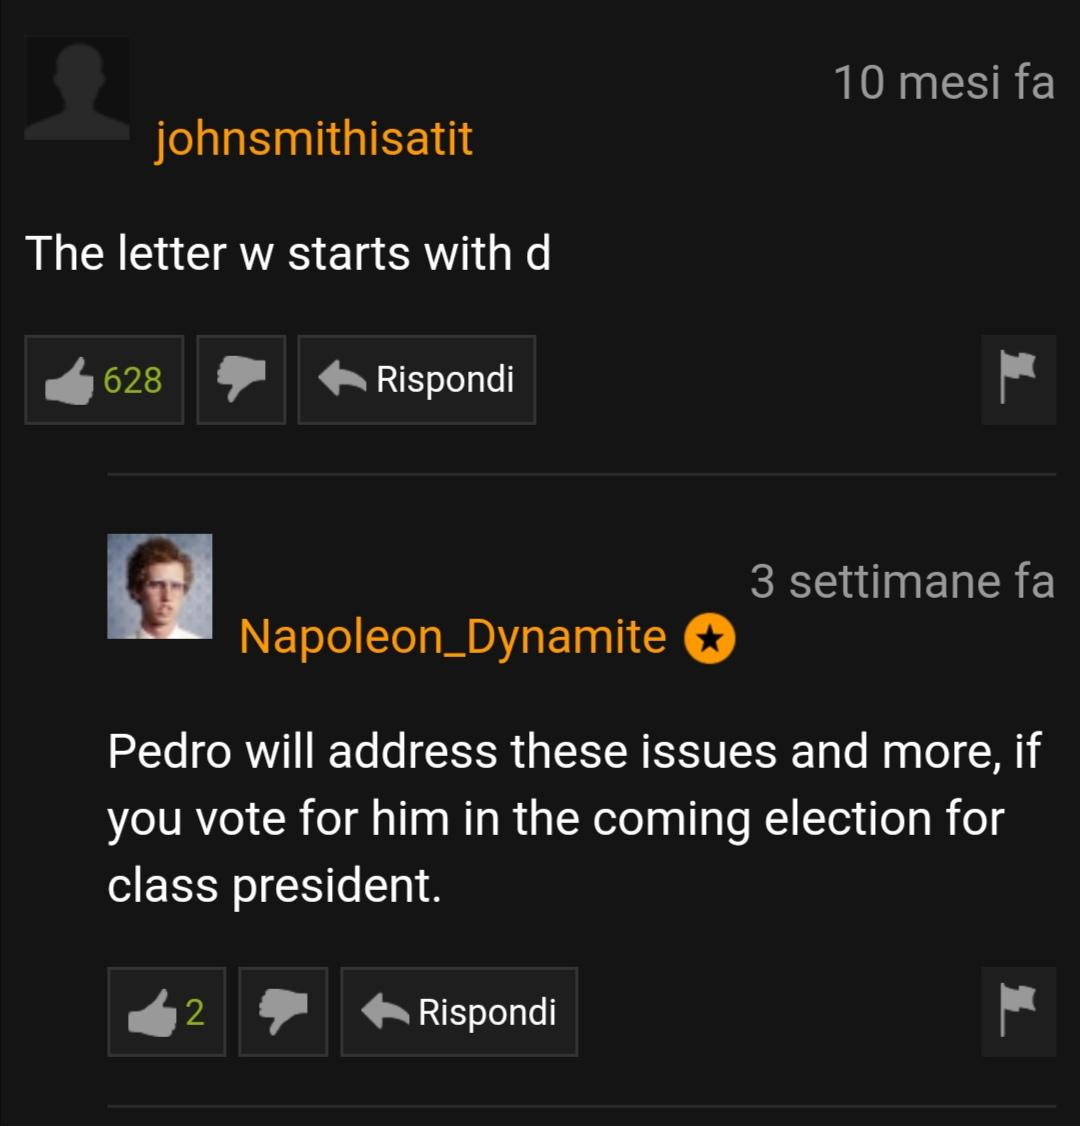 screenshot - 10 mesi fa johnsmithisatit The letter w starts with d 628 Rispondi 3 settimane fa Napoleon_Dynamite Pedro will address these issues and more, if you vote for him in the coming election for class president. Rispondi